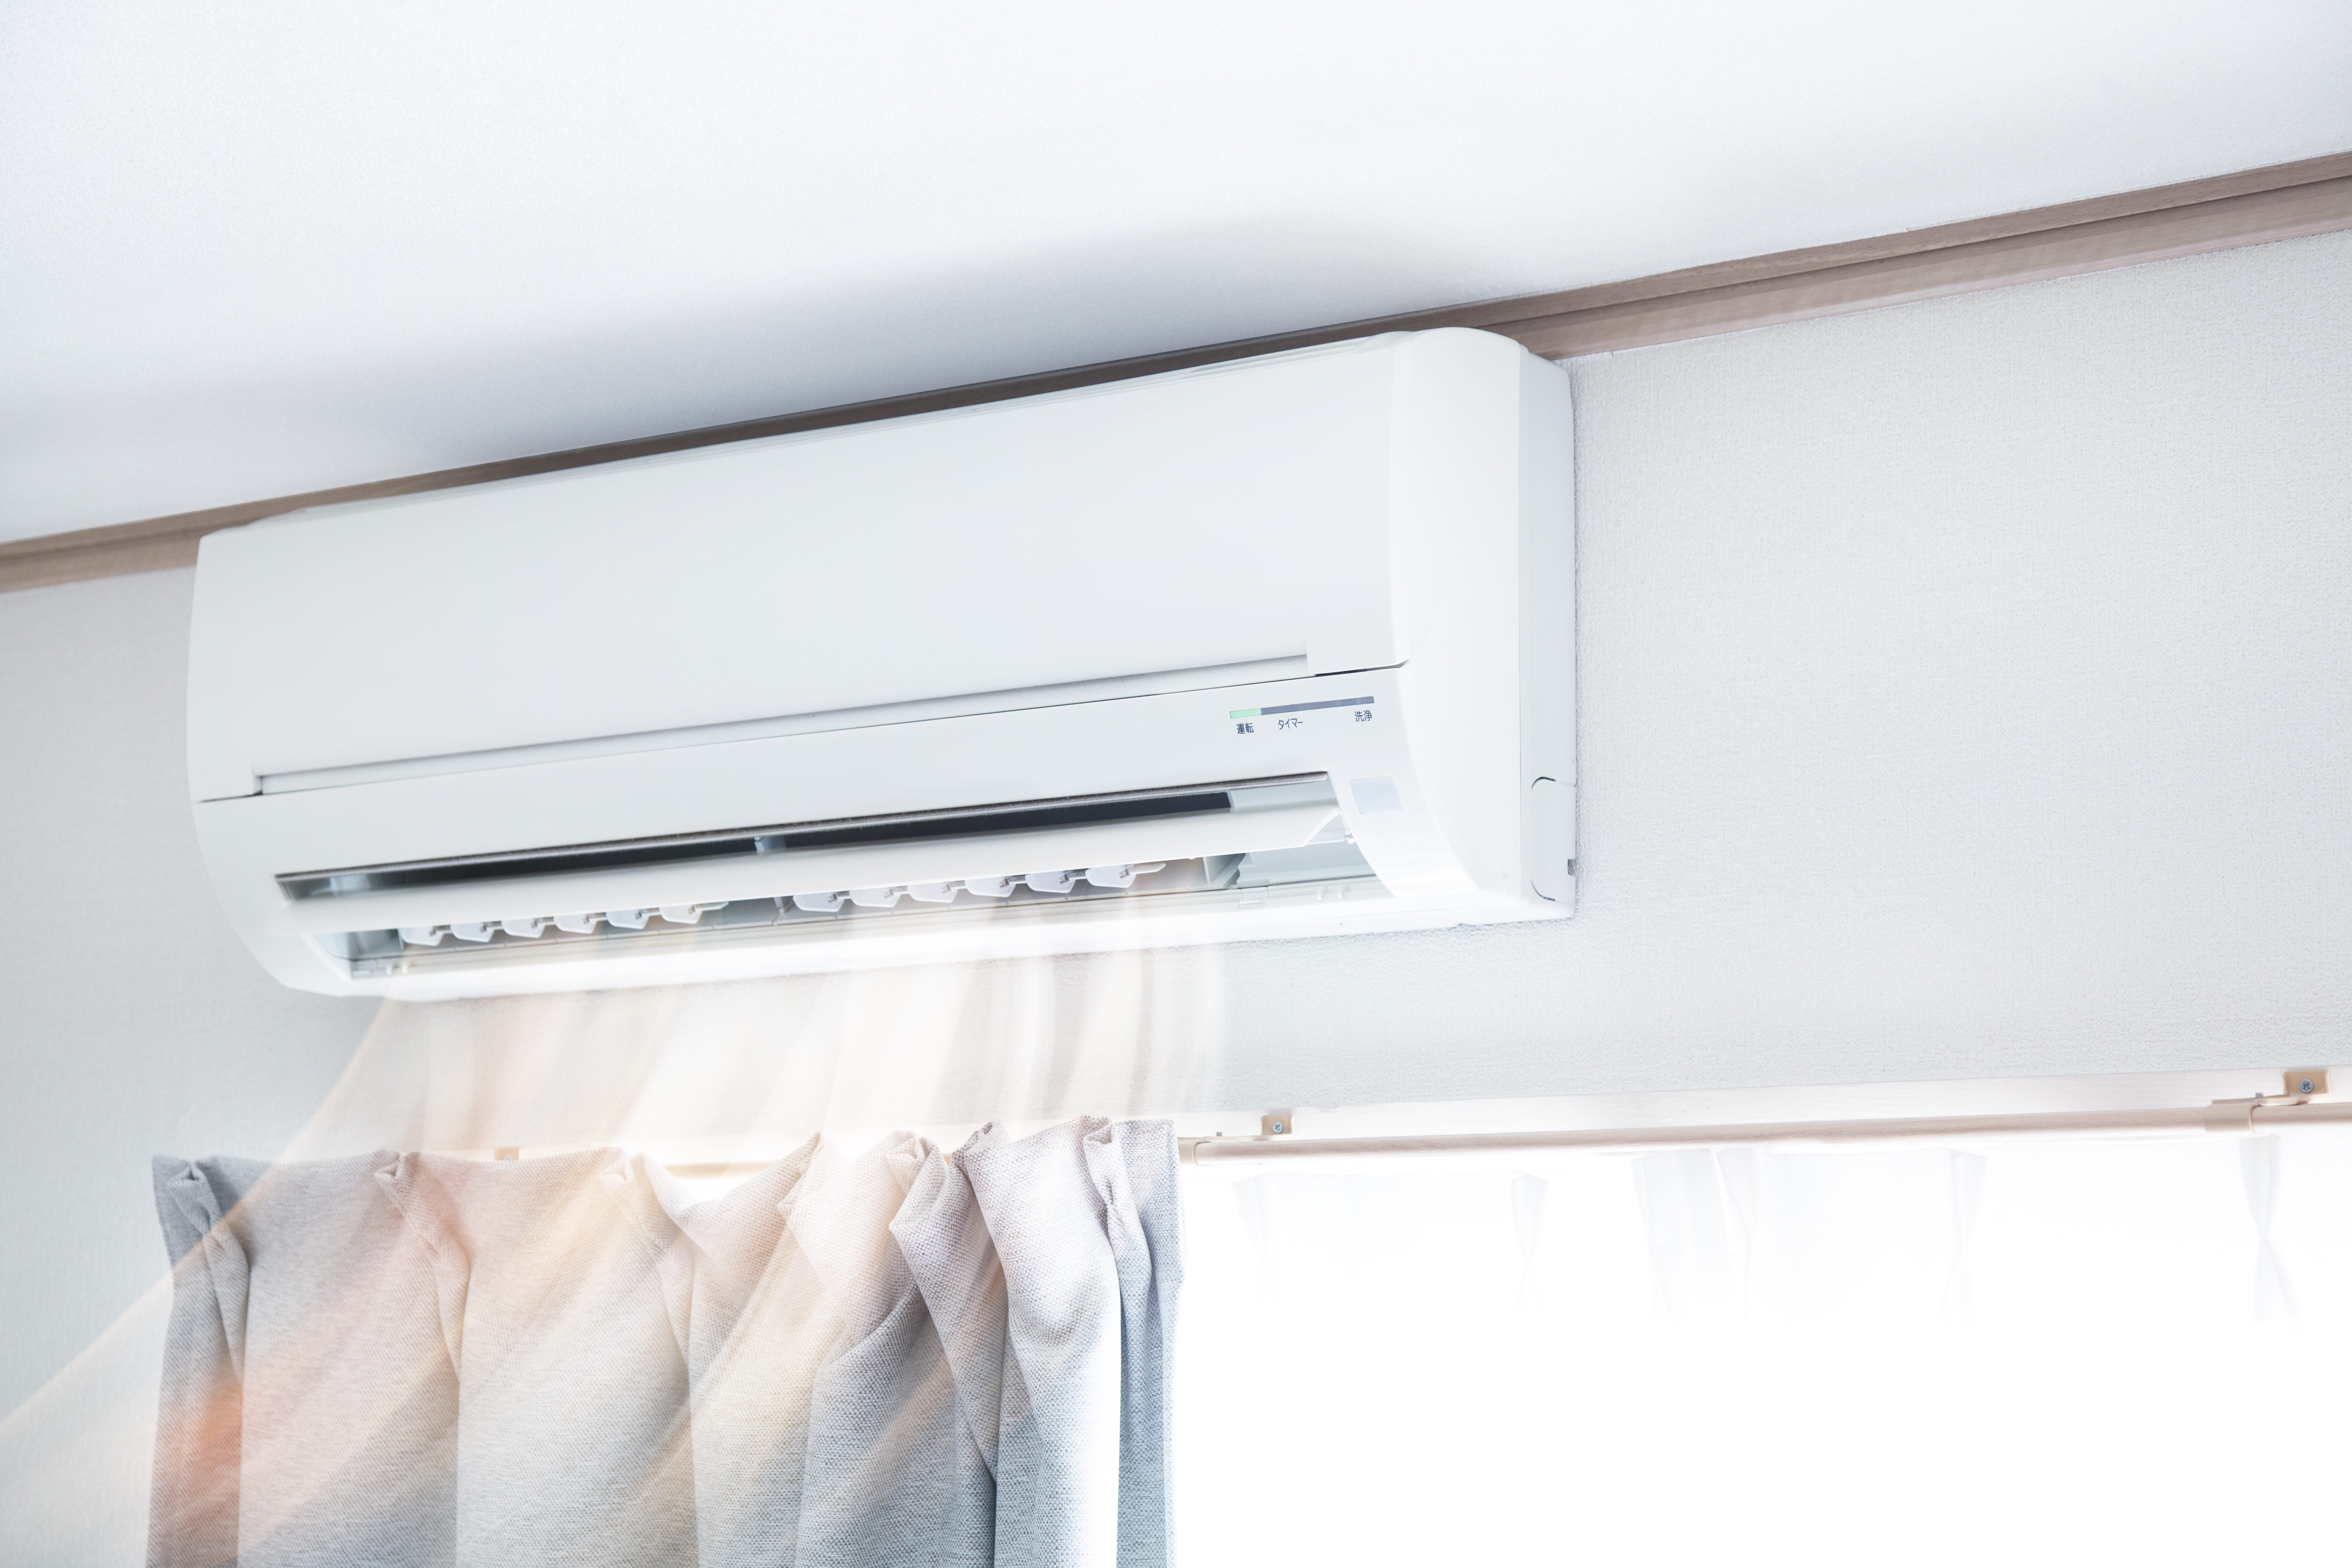 The global ductless heating and cooling systems market is projected to surpass $200B by 2030.